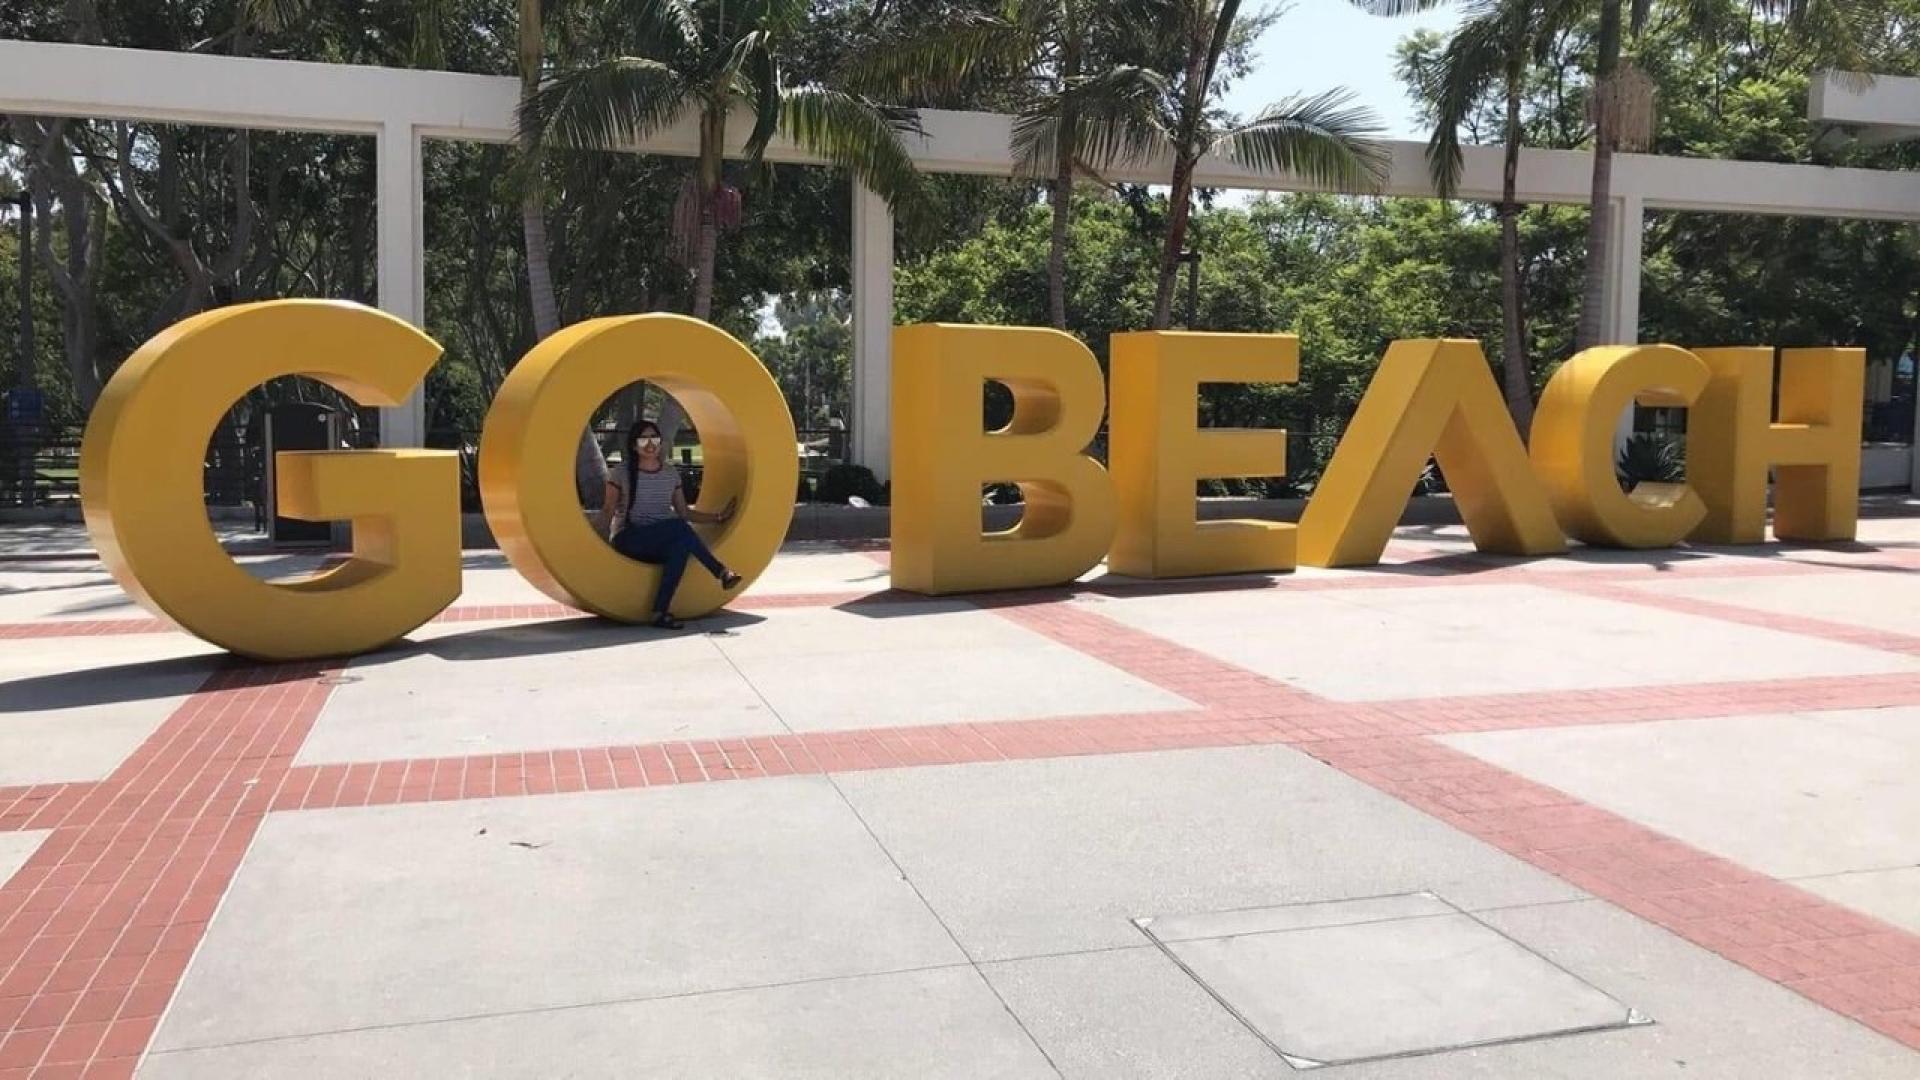 I fell in love with the sign before starting my first year at CSULB.